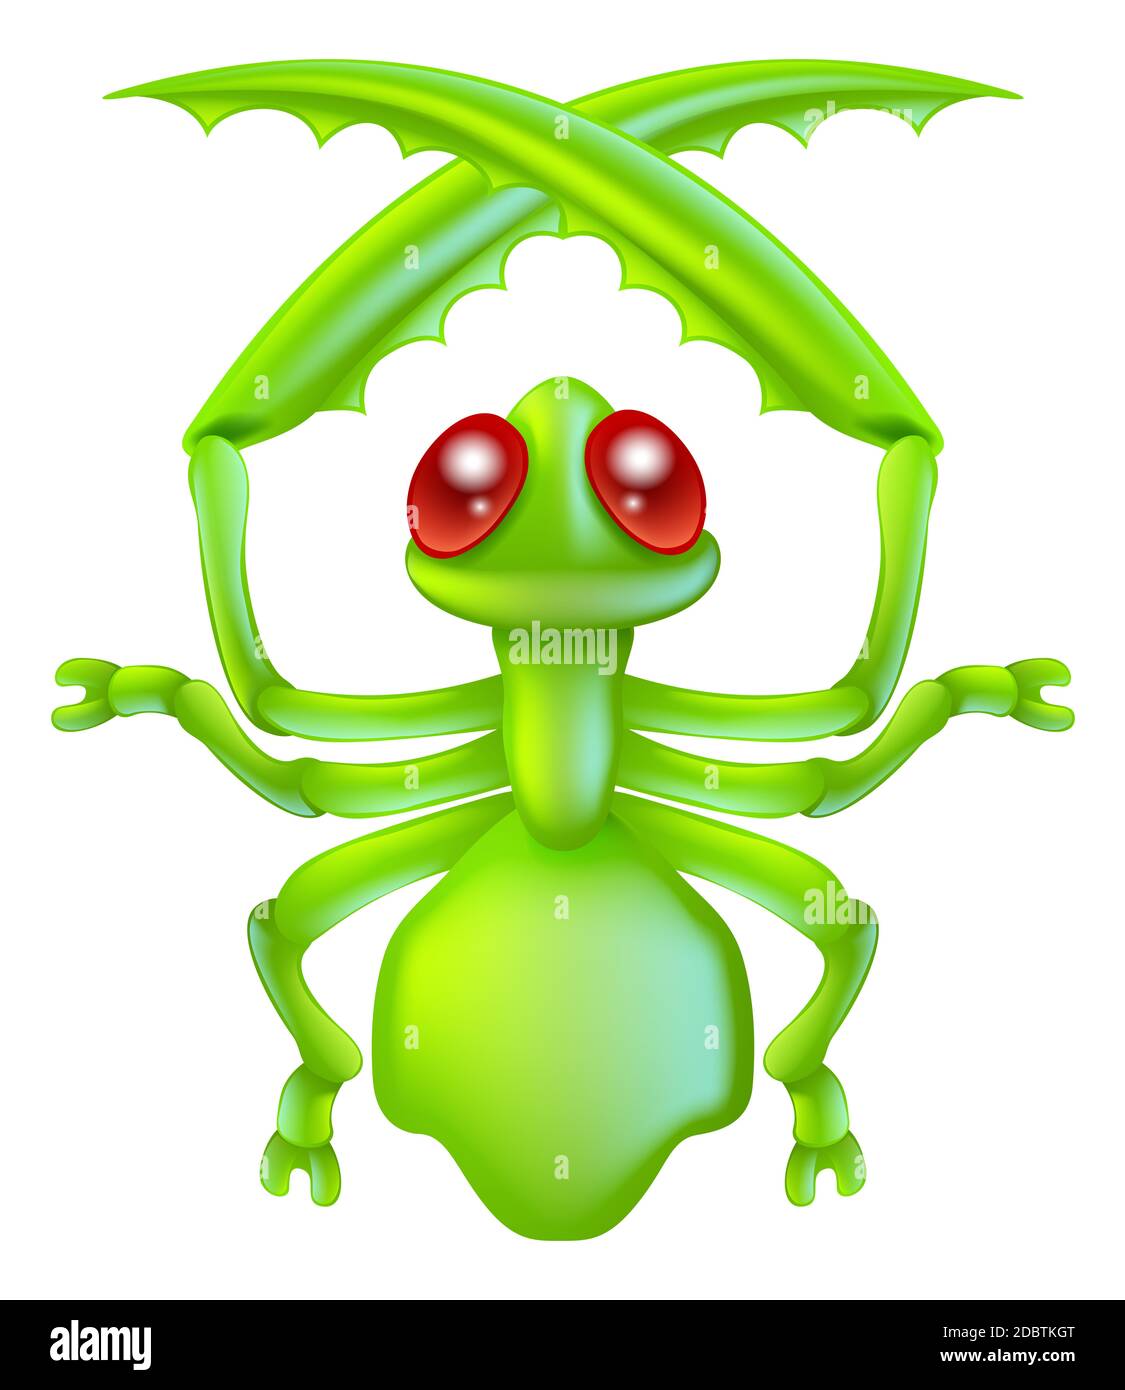 An illustration of a cartoon insect preying mantis bug character Stock Photo